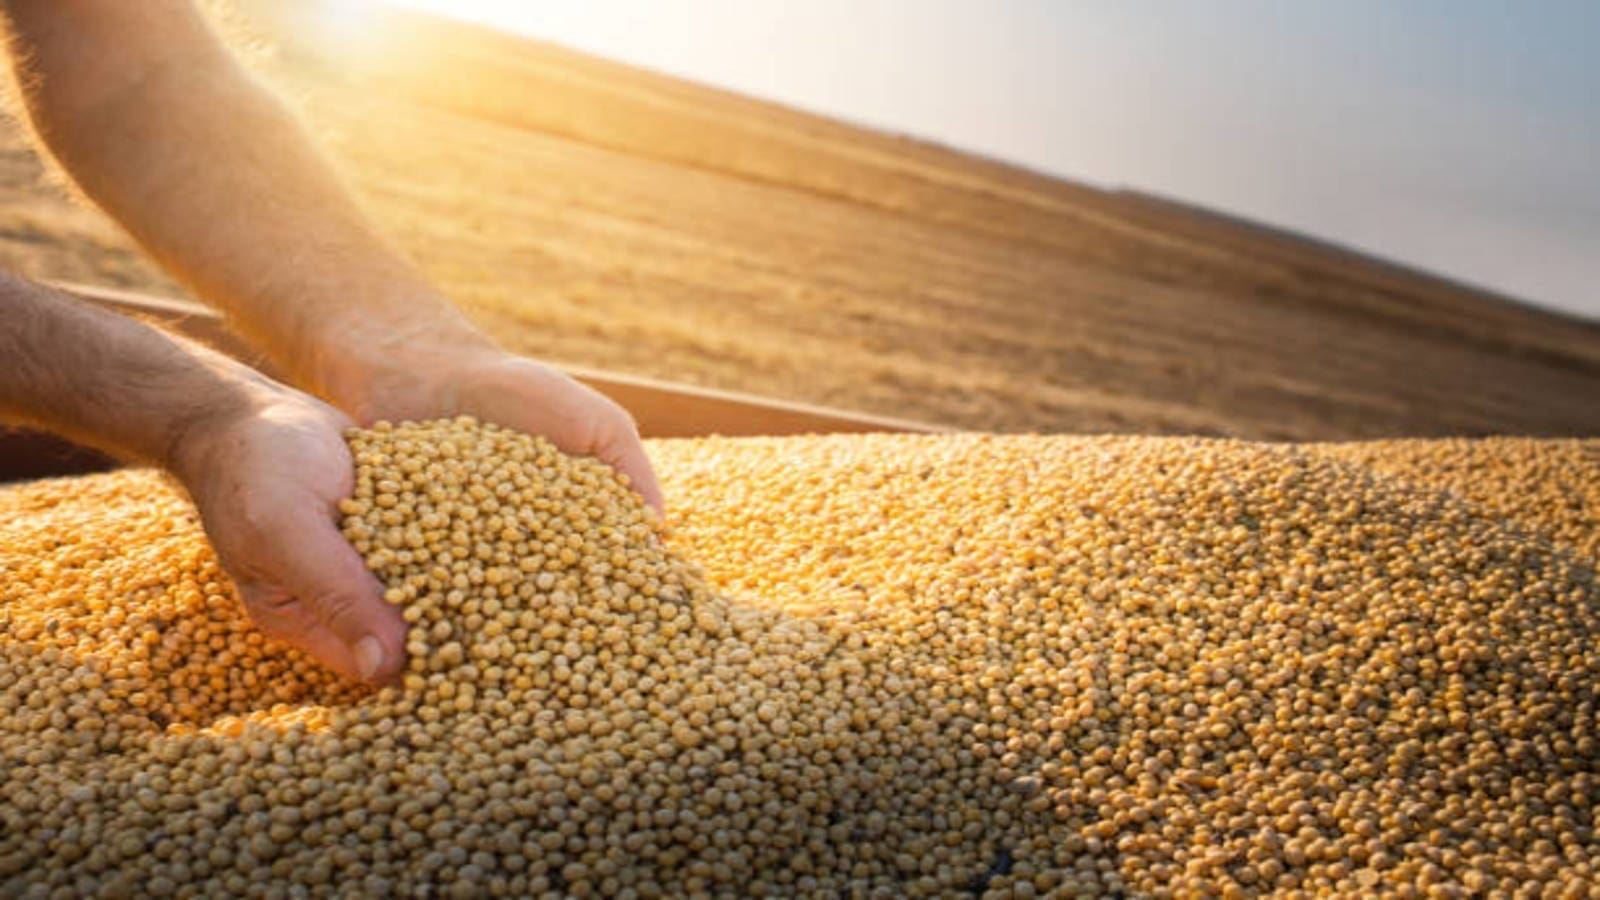 Global oilseed production to grow 5 percent in 2021/22 buoyed by rise in soybean output in the Americas